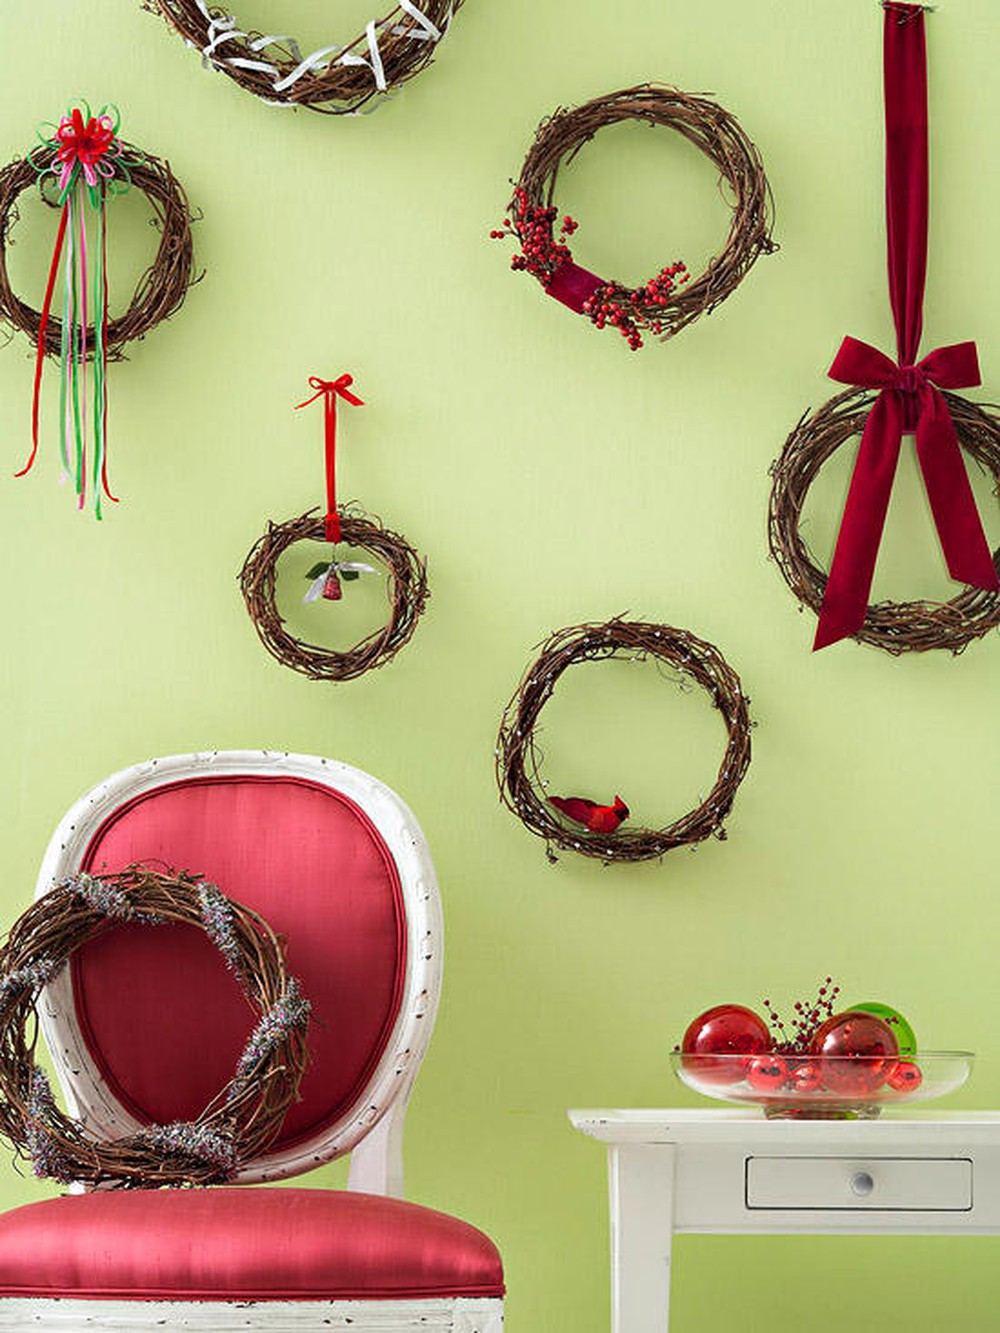 t5-17 Modern Christmas decorations ideas that are heartwarming